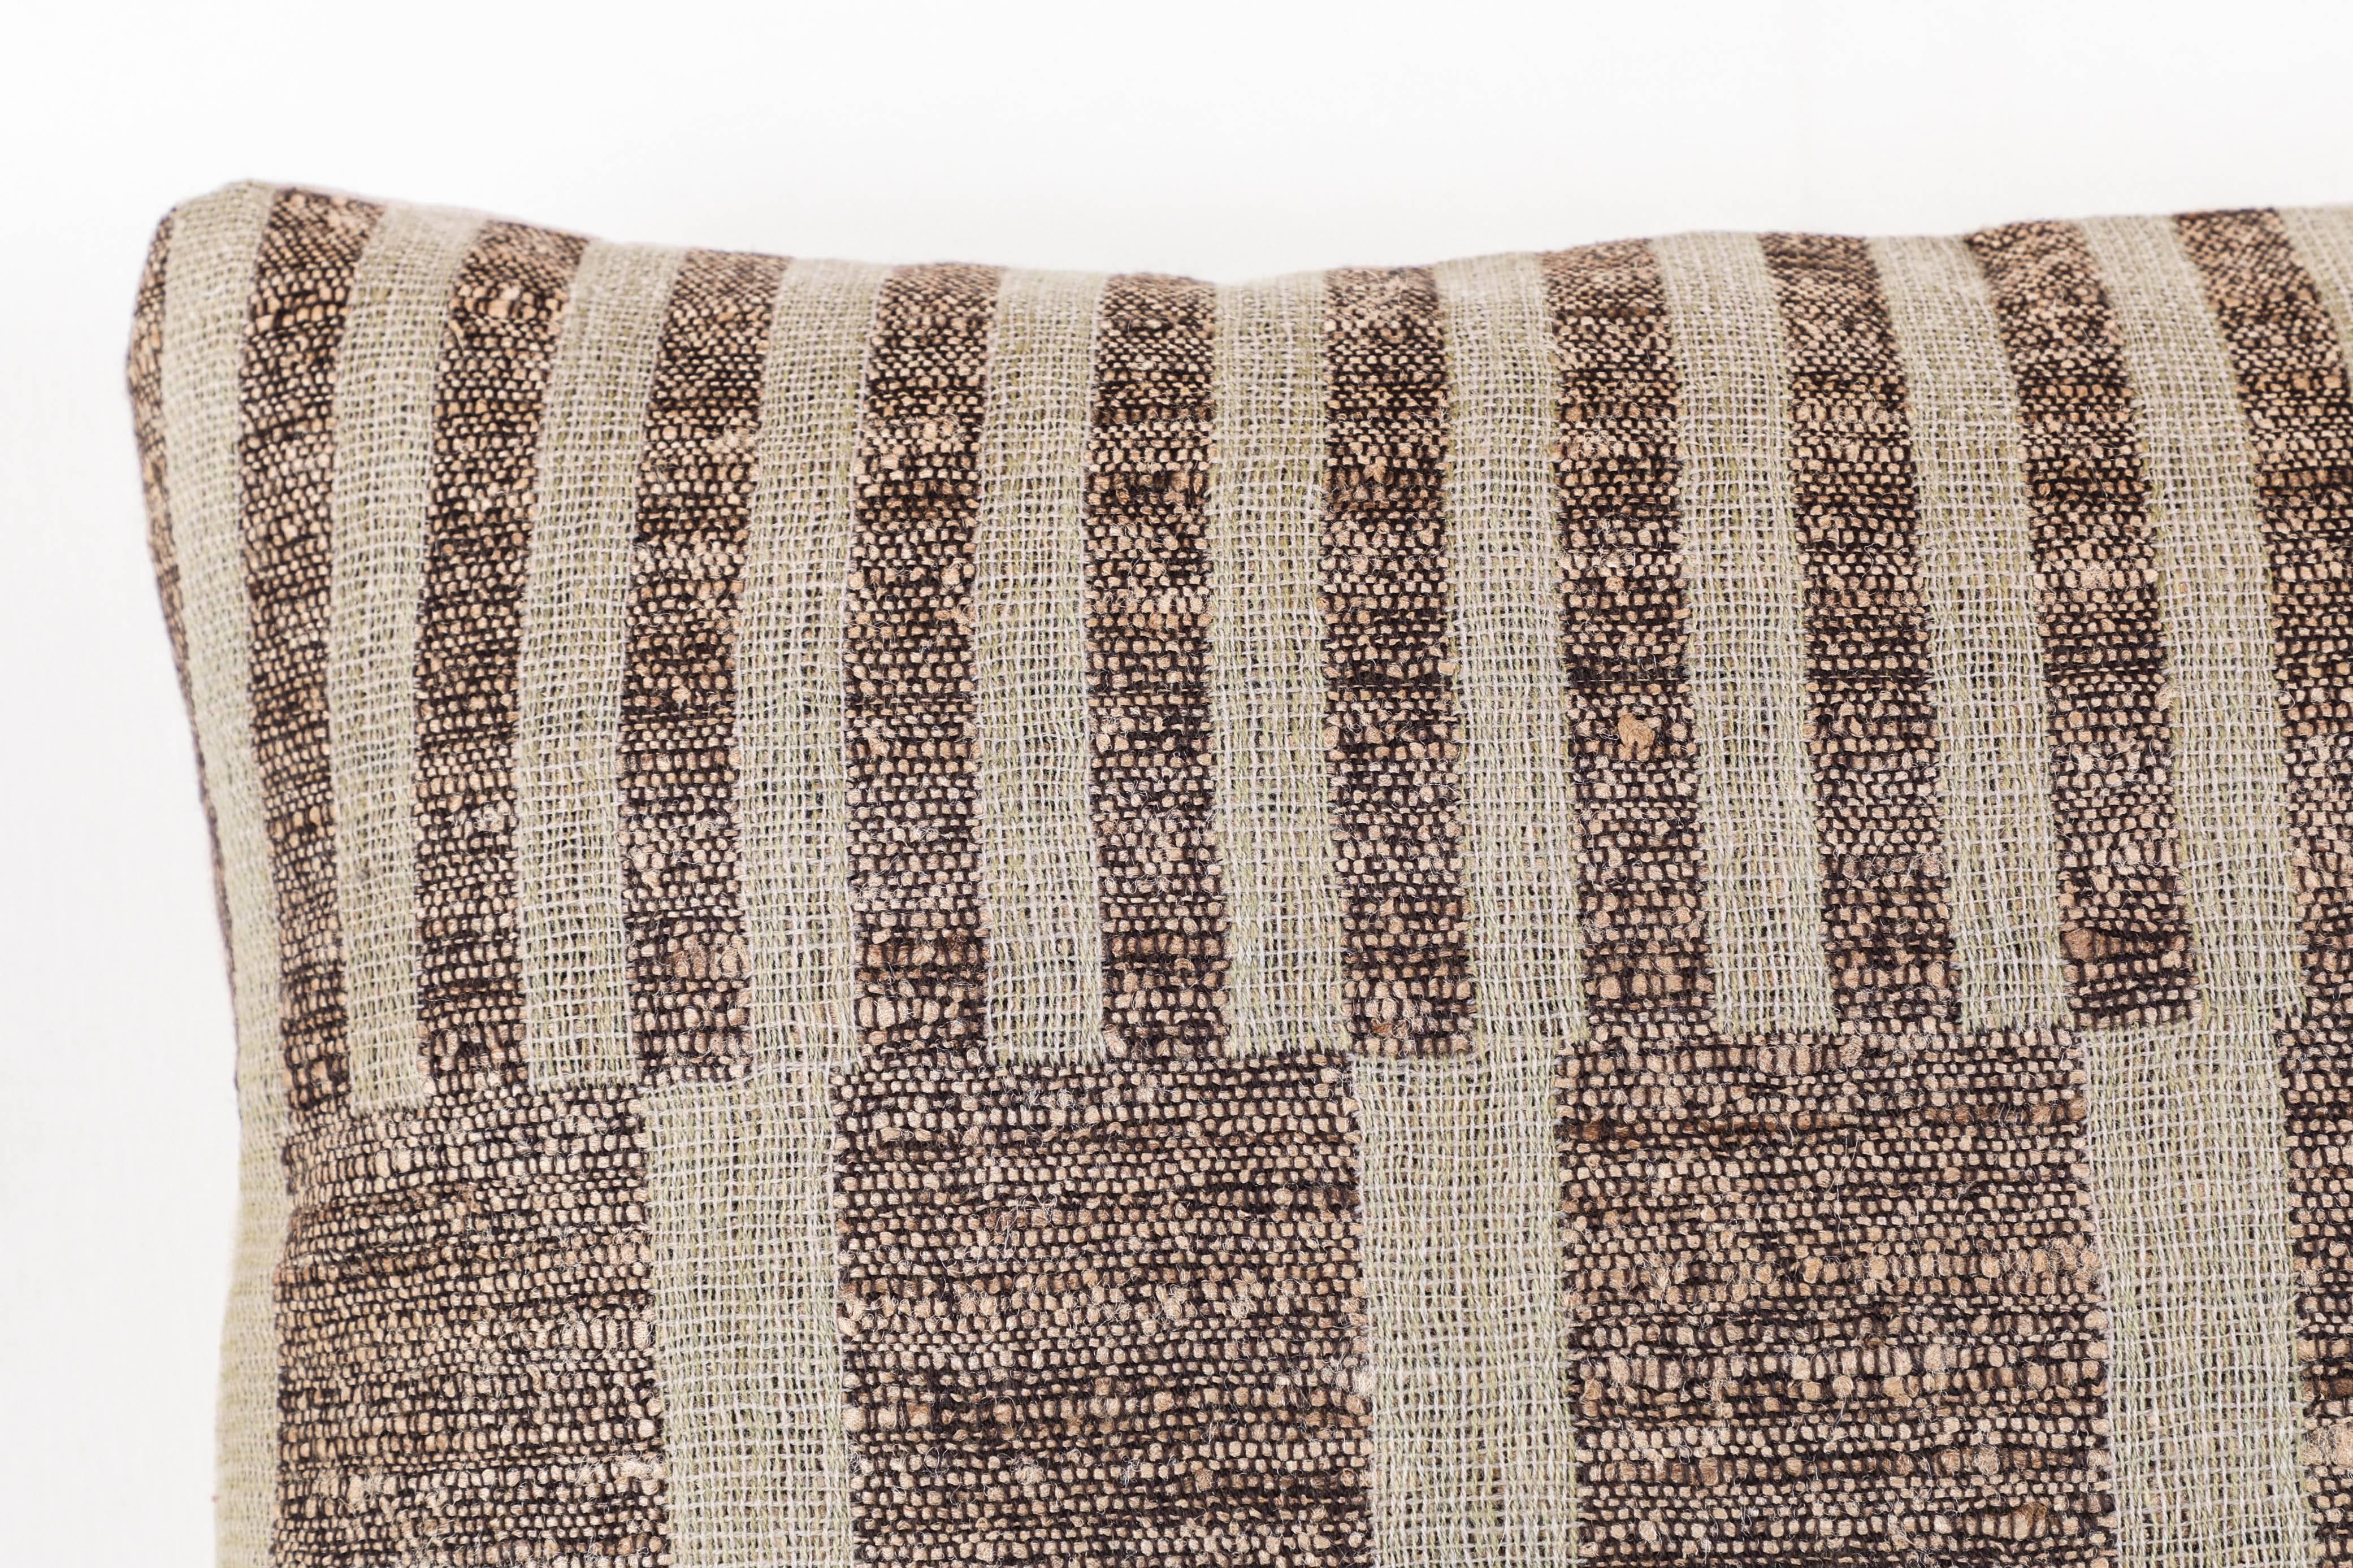 A contemporary line of cushions, pillows, throws, bedcovers, bedspreads and yardage hand woven in India on antique Jacquard looms. Hand spun wool; cotton, linen, and raw silk give the textiles an appealing uneven quality. Sizes vary slightly.

This